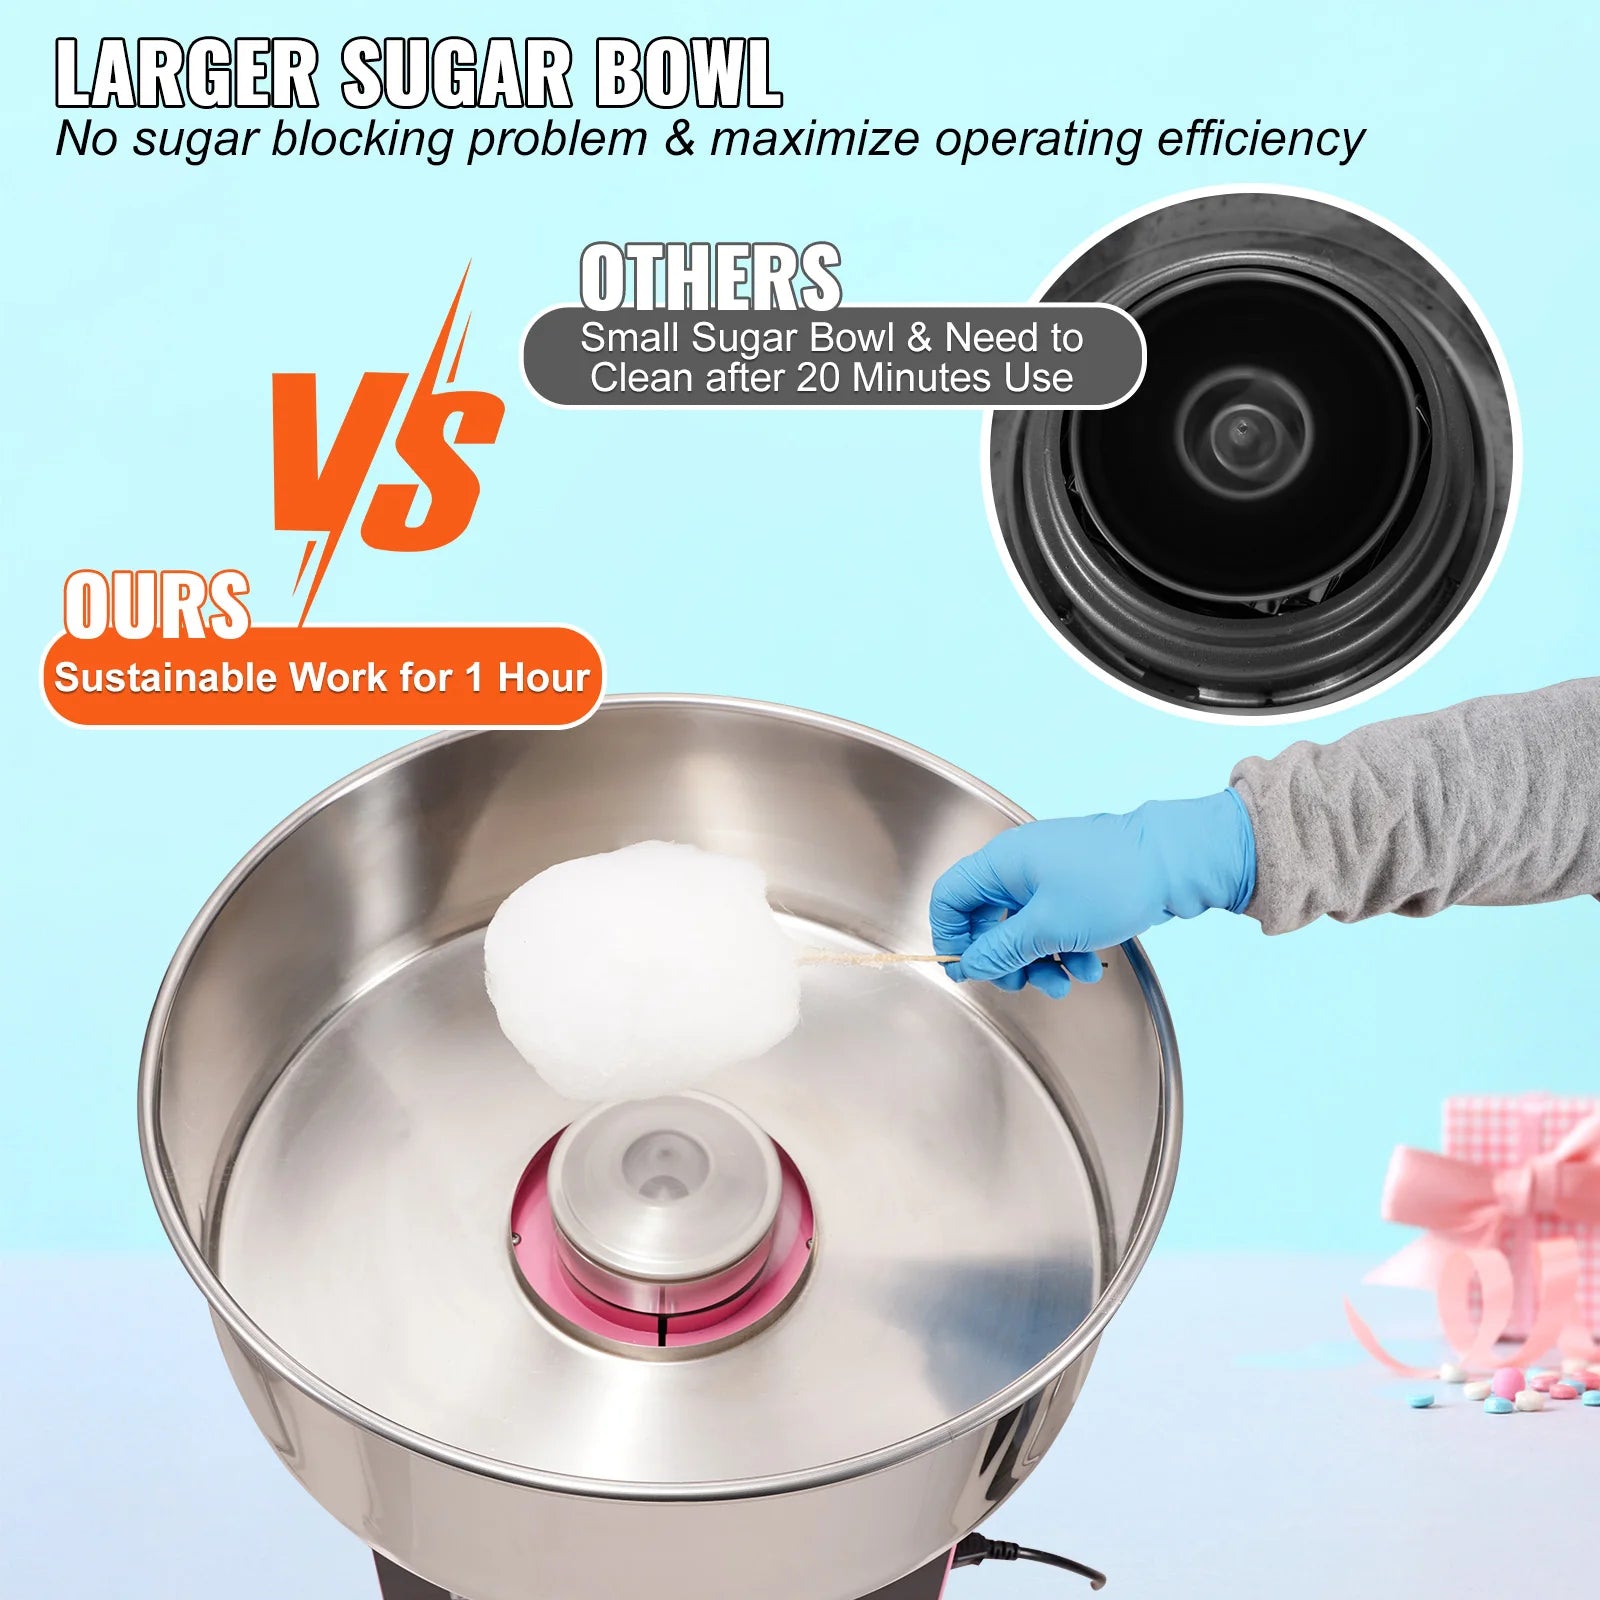 Cotton Candy Machine, Commercial Grade, Stainless Steel Bowl